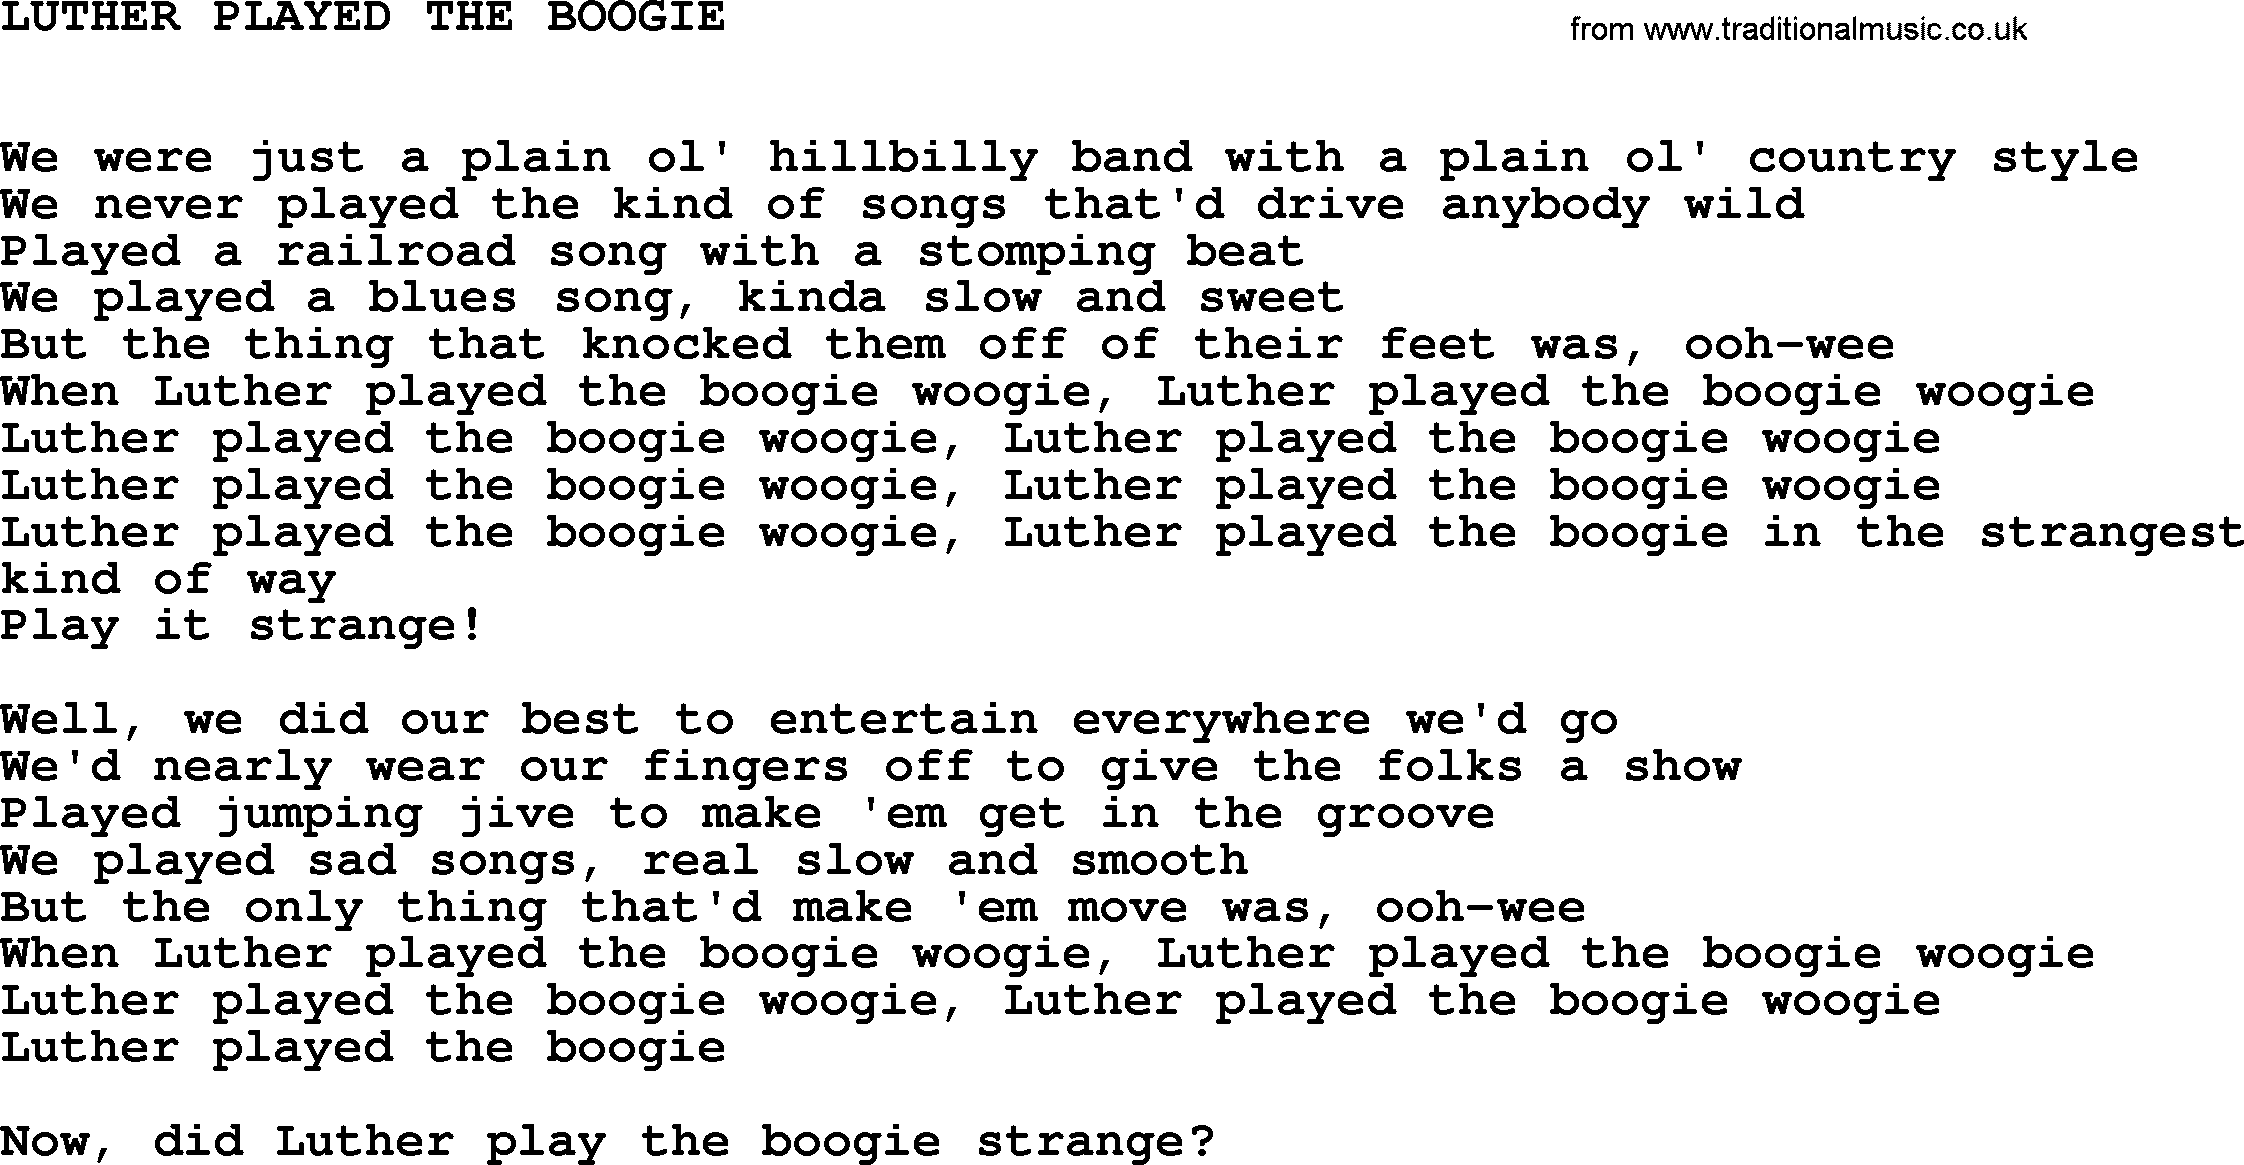 Johnny Cash song Luther Played The Boogie.txt lyrics